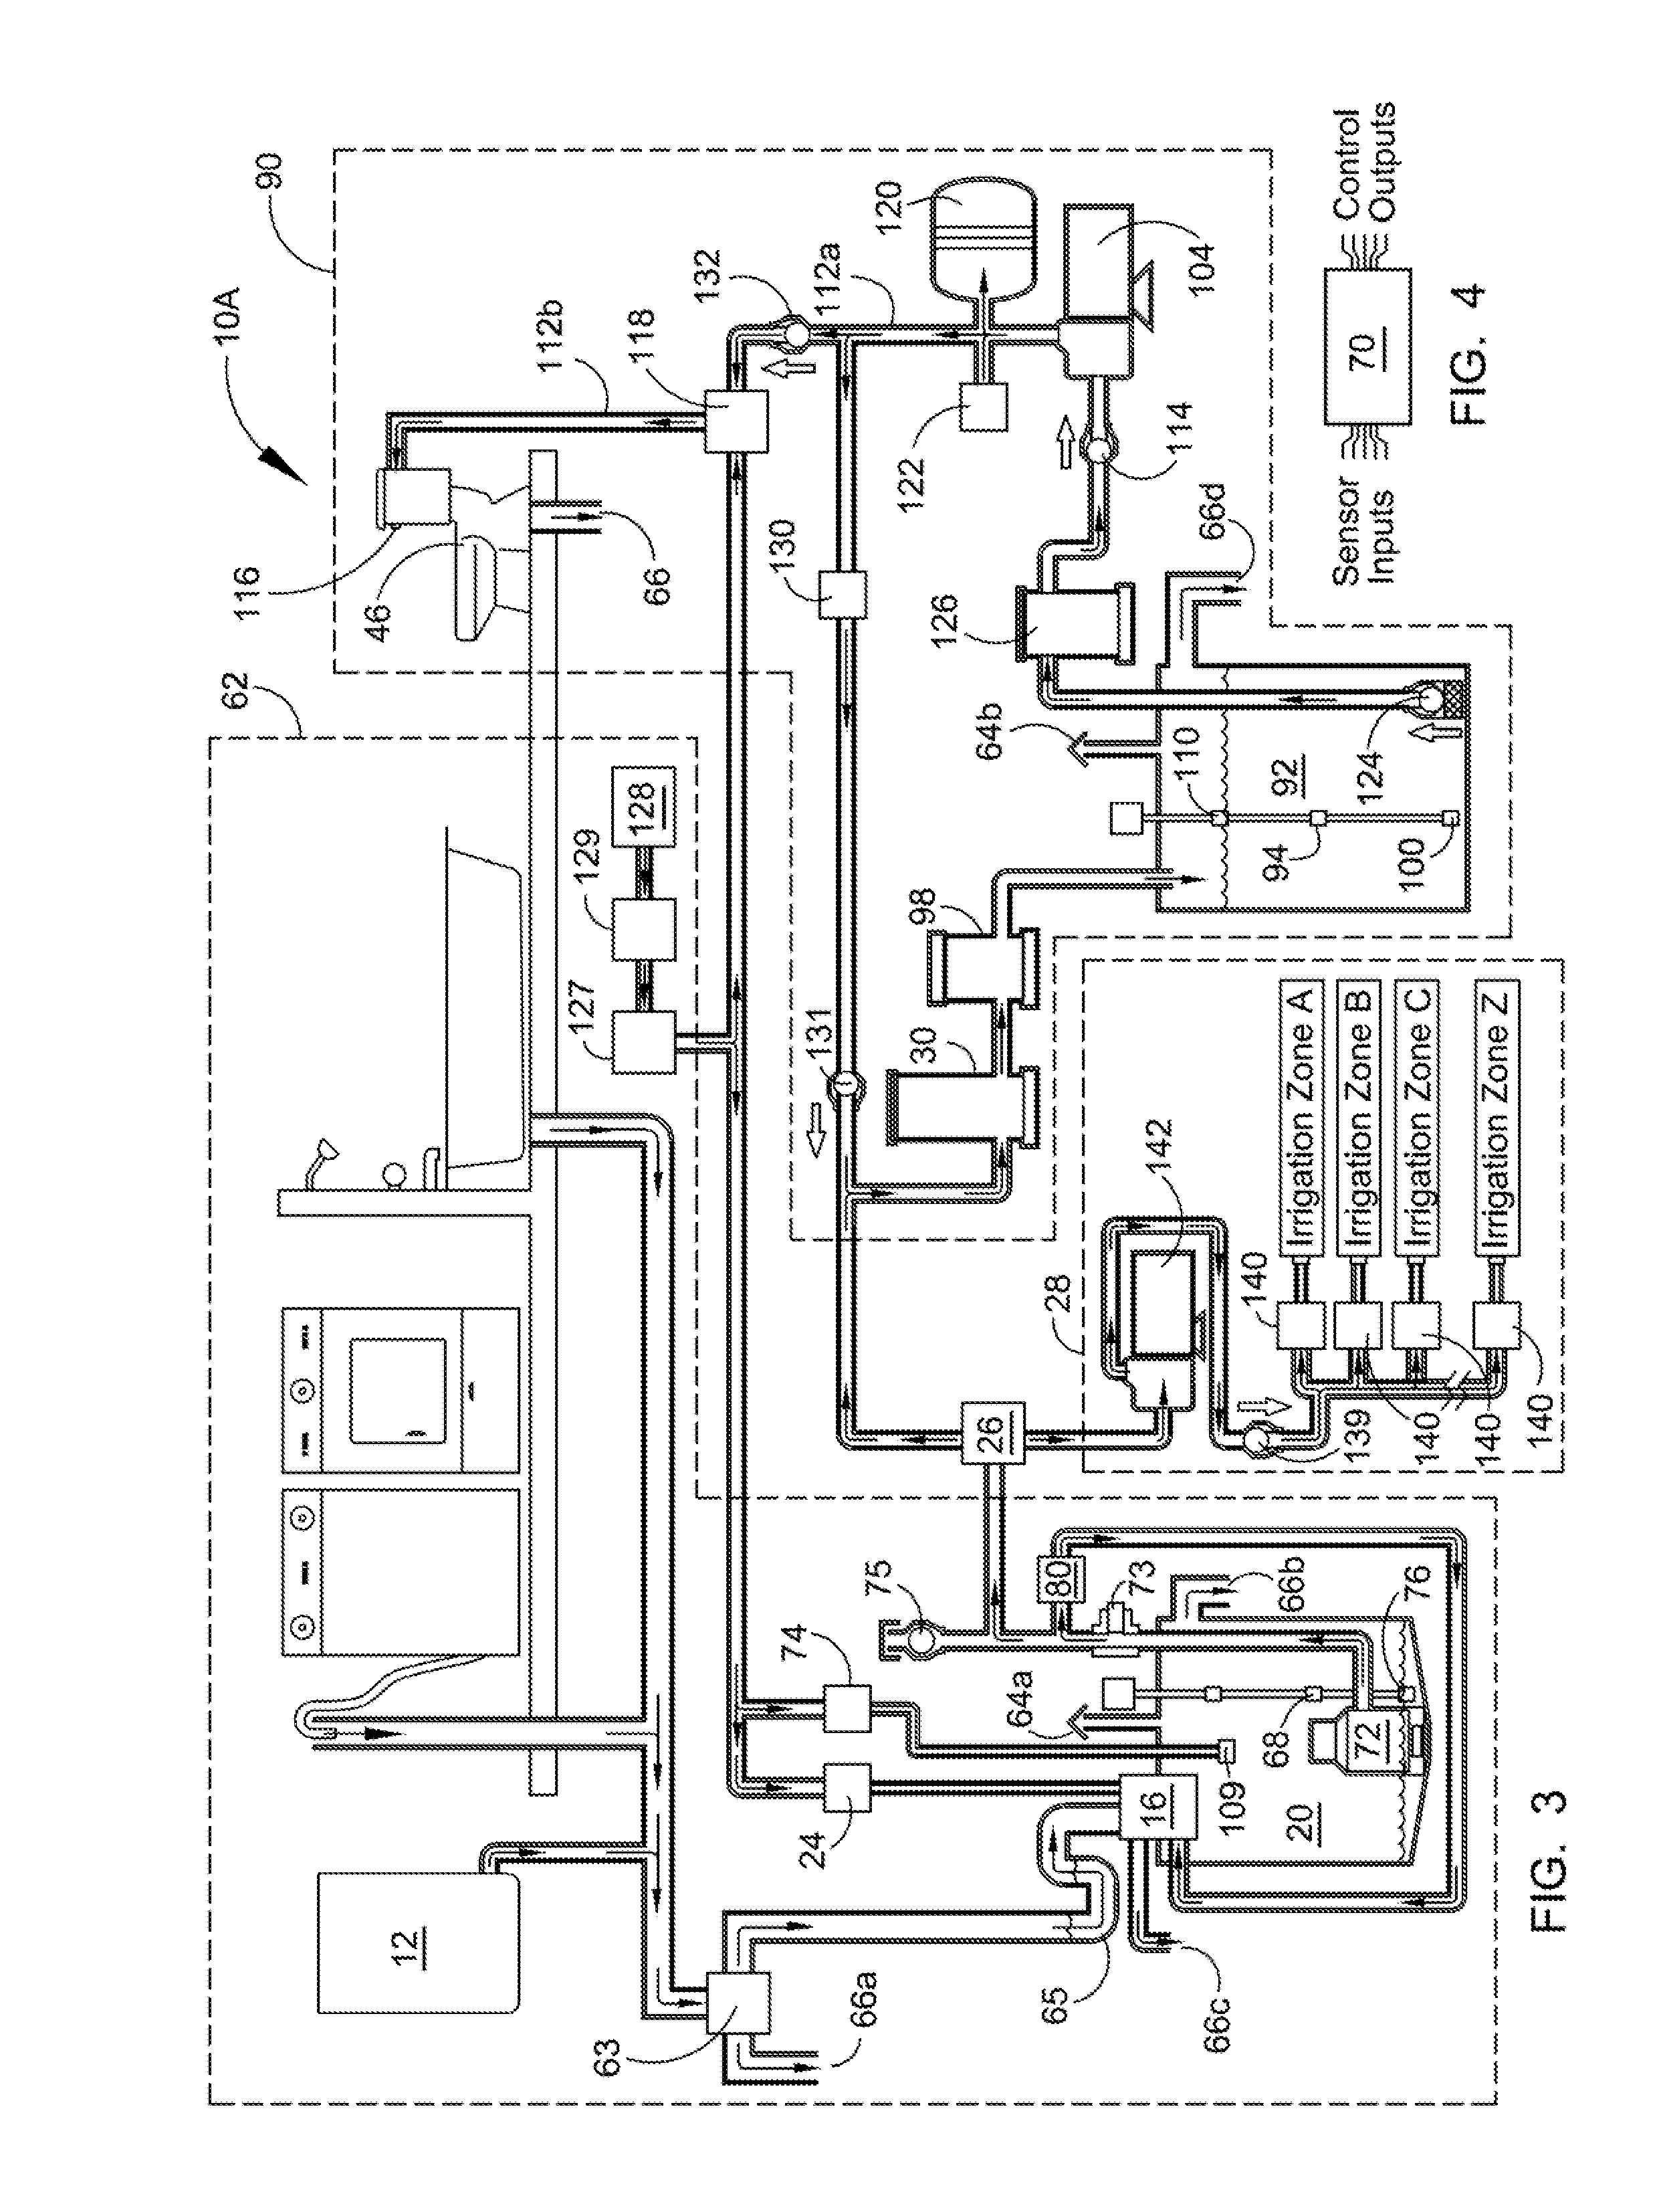 Grey water processing and distribution system